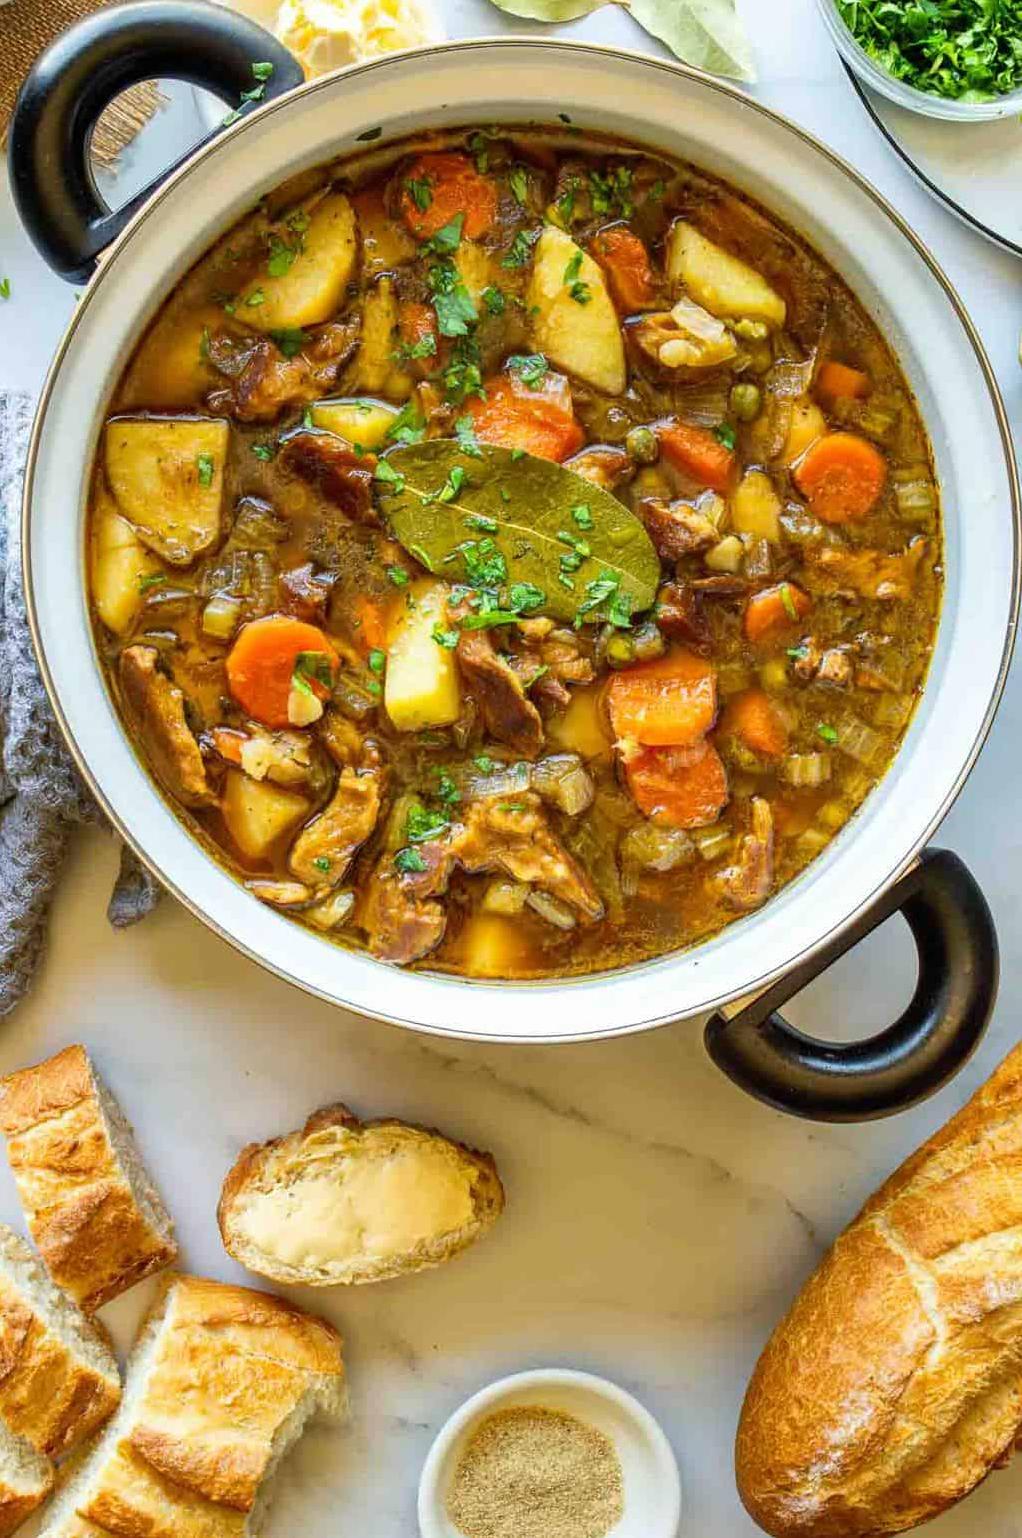  No meat? No problem! This stew will still leave you satisfied